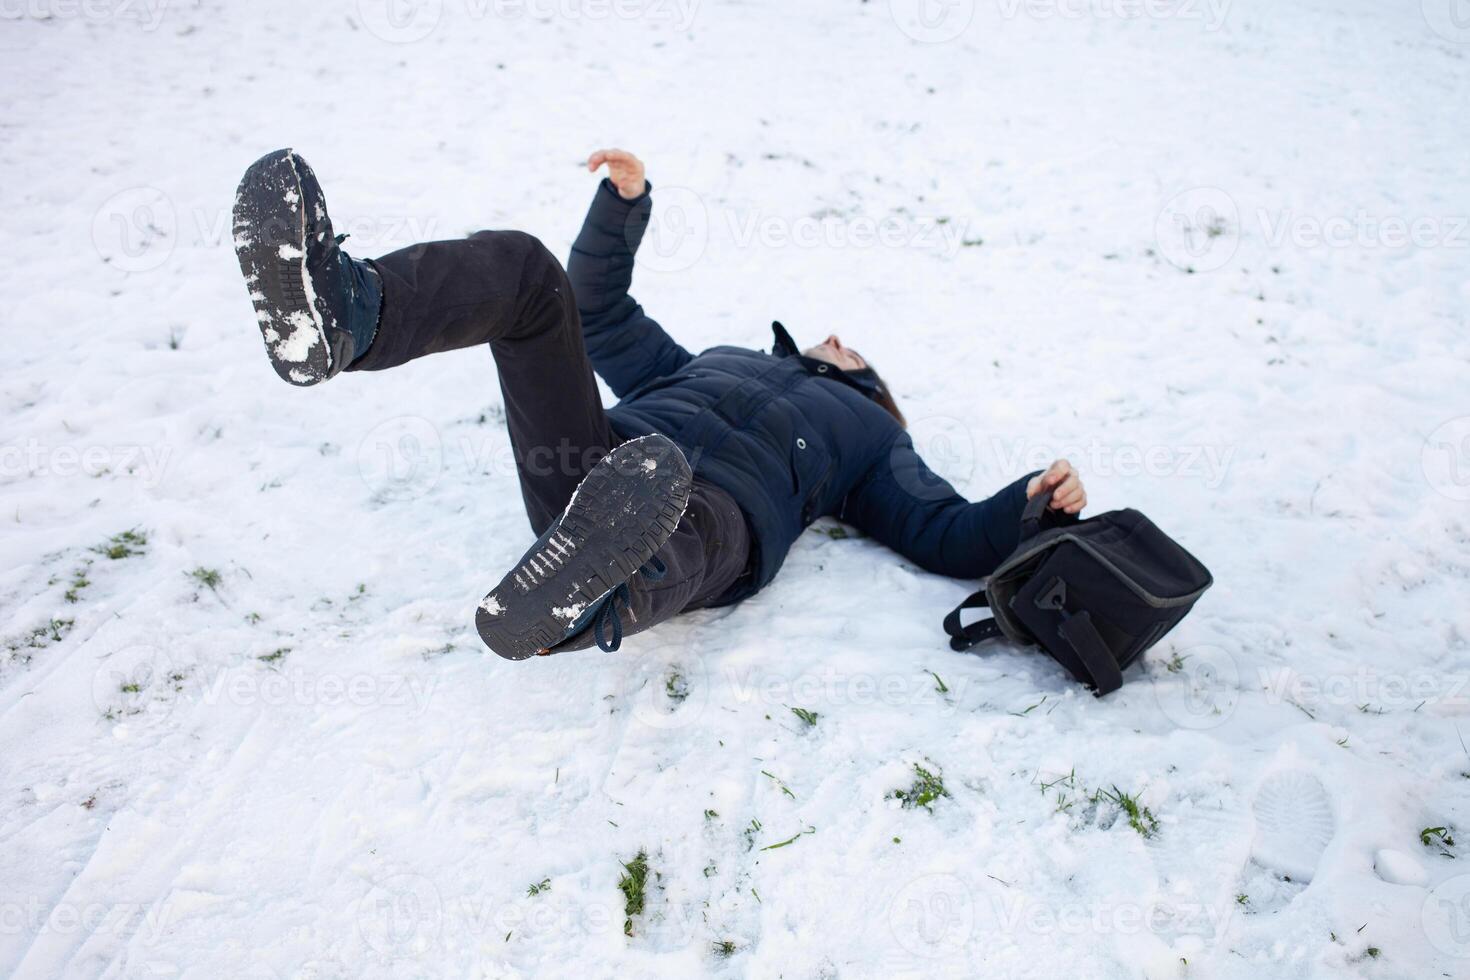 A man falls in the snow. The man slipped and was injured. Falling on ice. Winter. Fracture, bruise, dislocation. photo